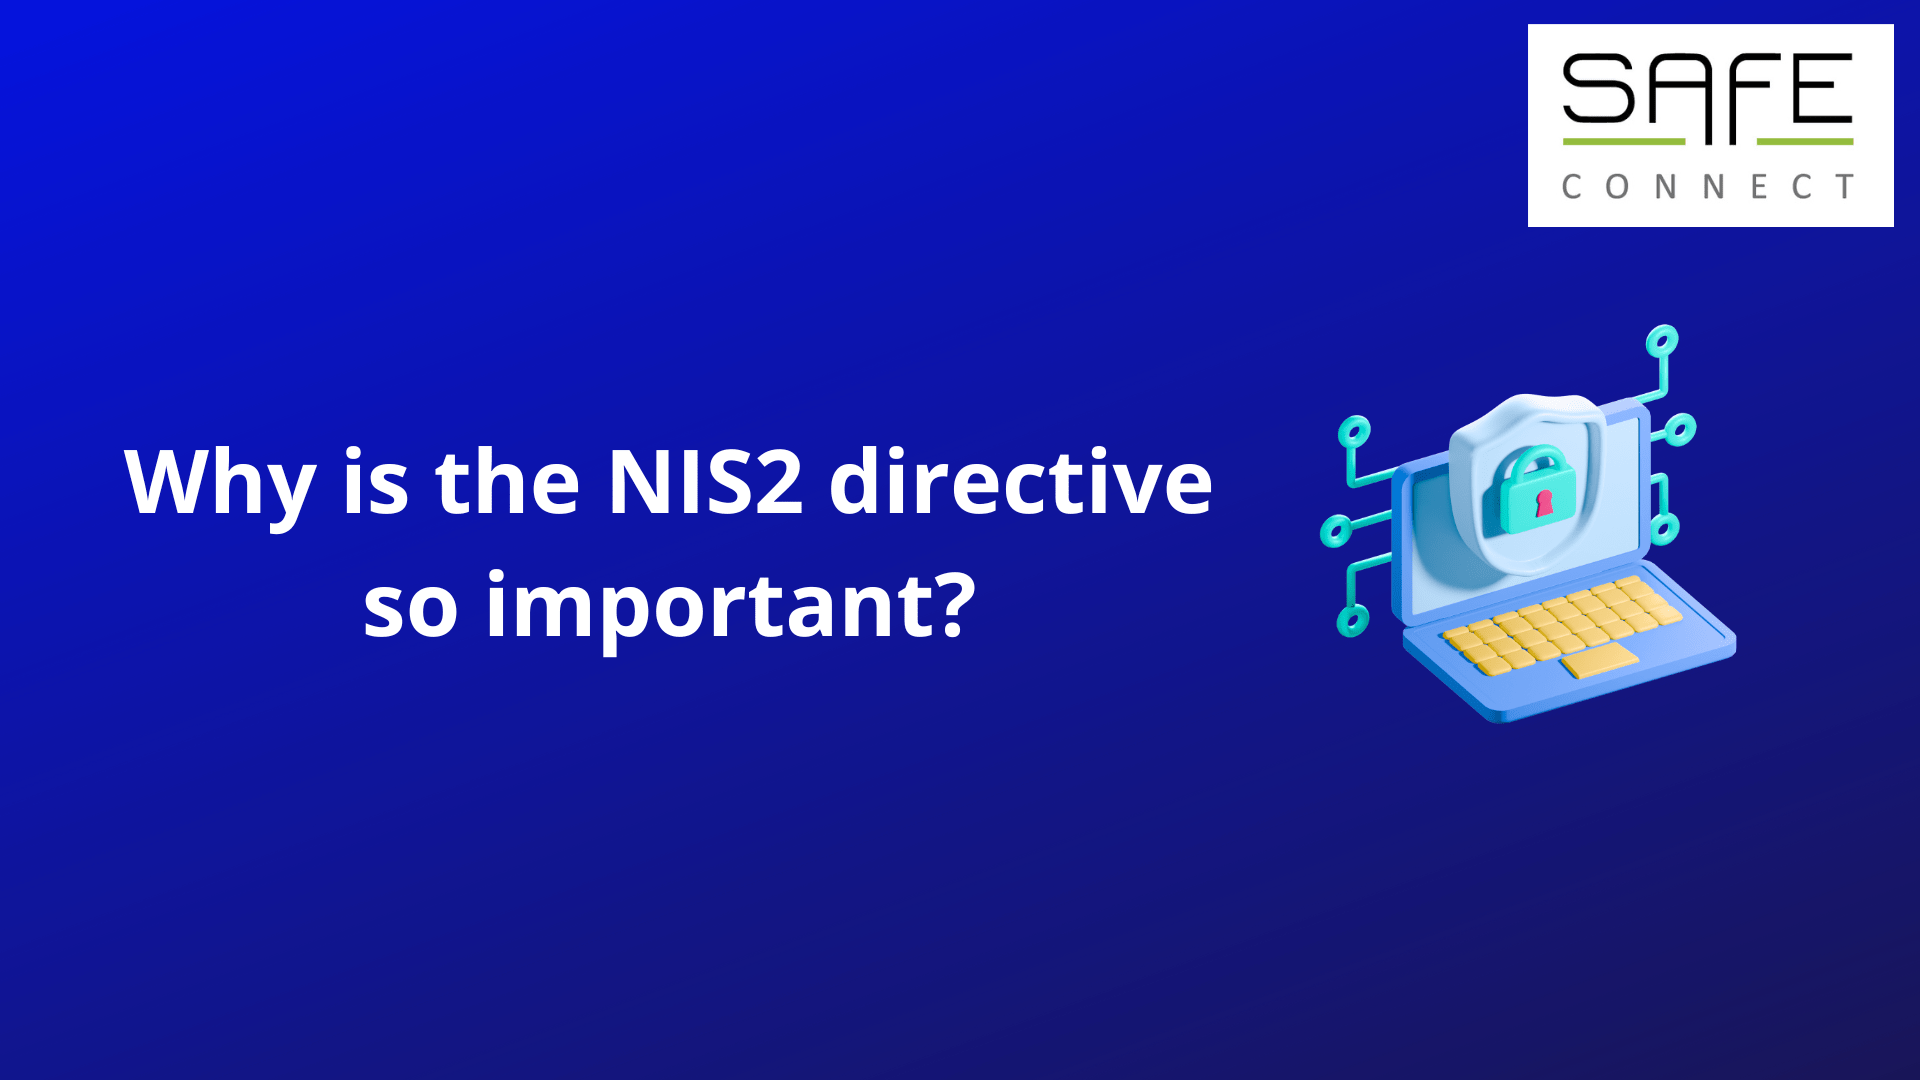 Why is the NIS2 directive so important